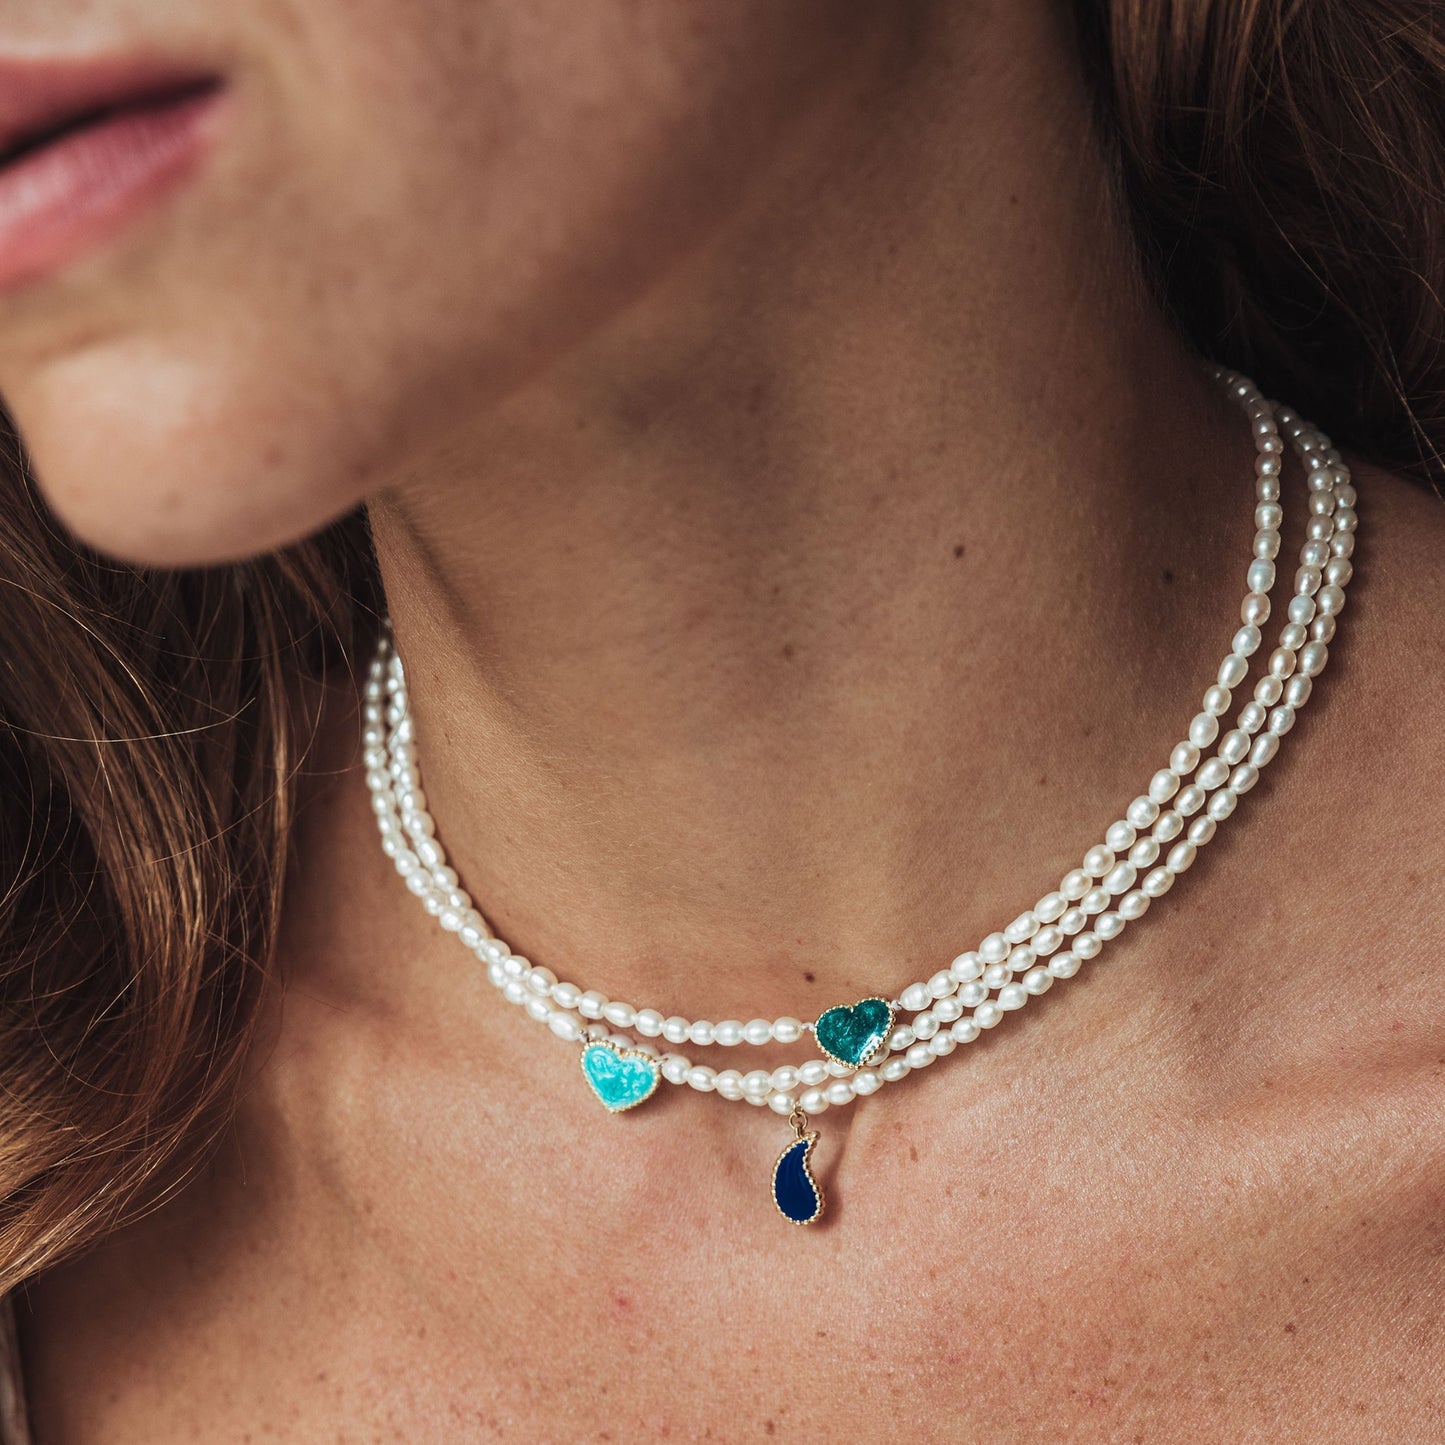 Load image into Gallery viewer, The Pearly Enamel heart necklace in turquoise - Oria.jewelry
